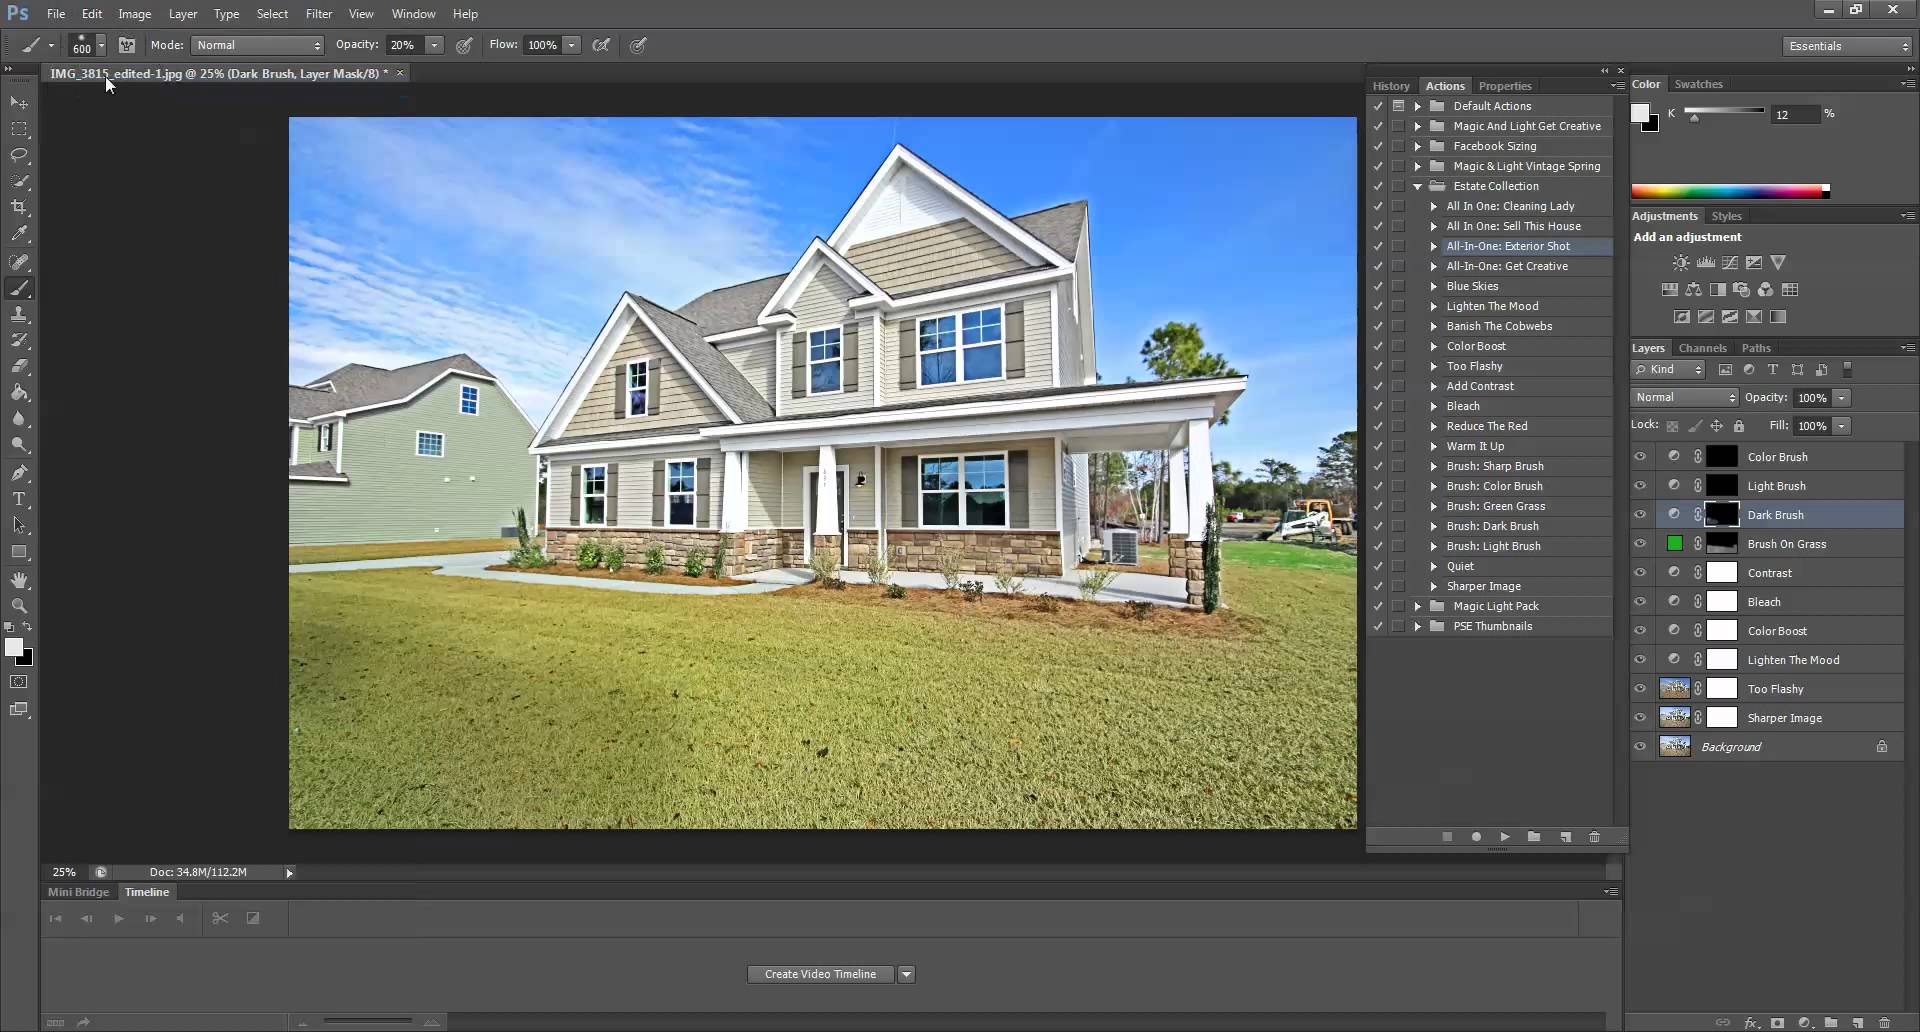 Photoshop: Taking the real out of real estate